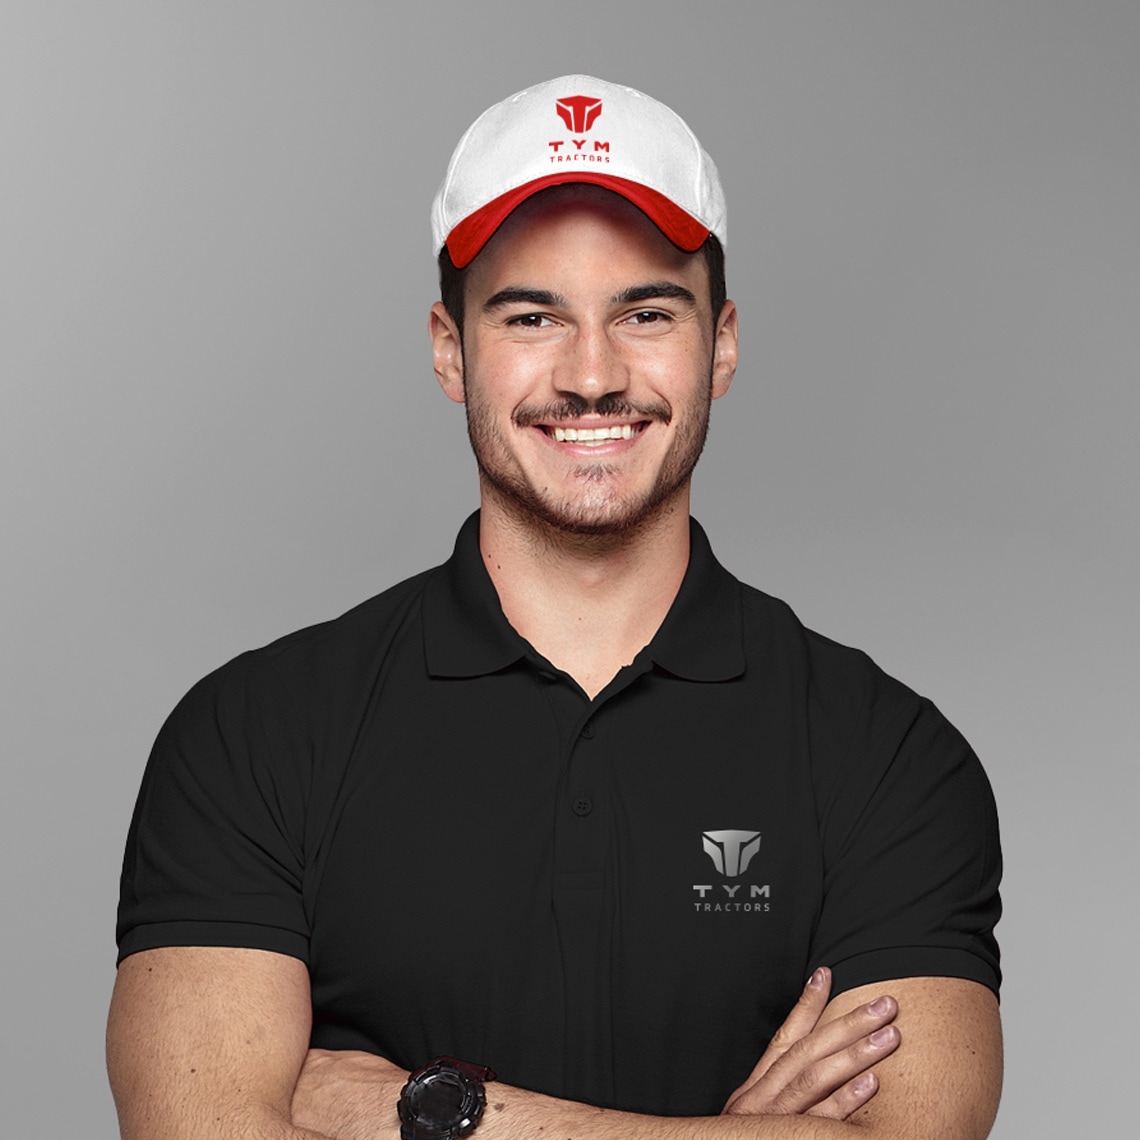 A smiling man with a baseball cap and a black t-shirt: examples of the design system could be applied to marketing materils